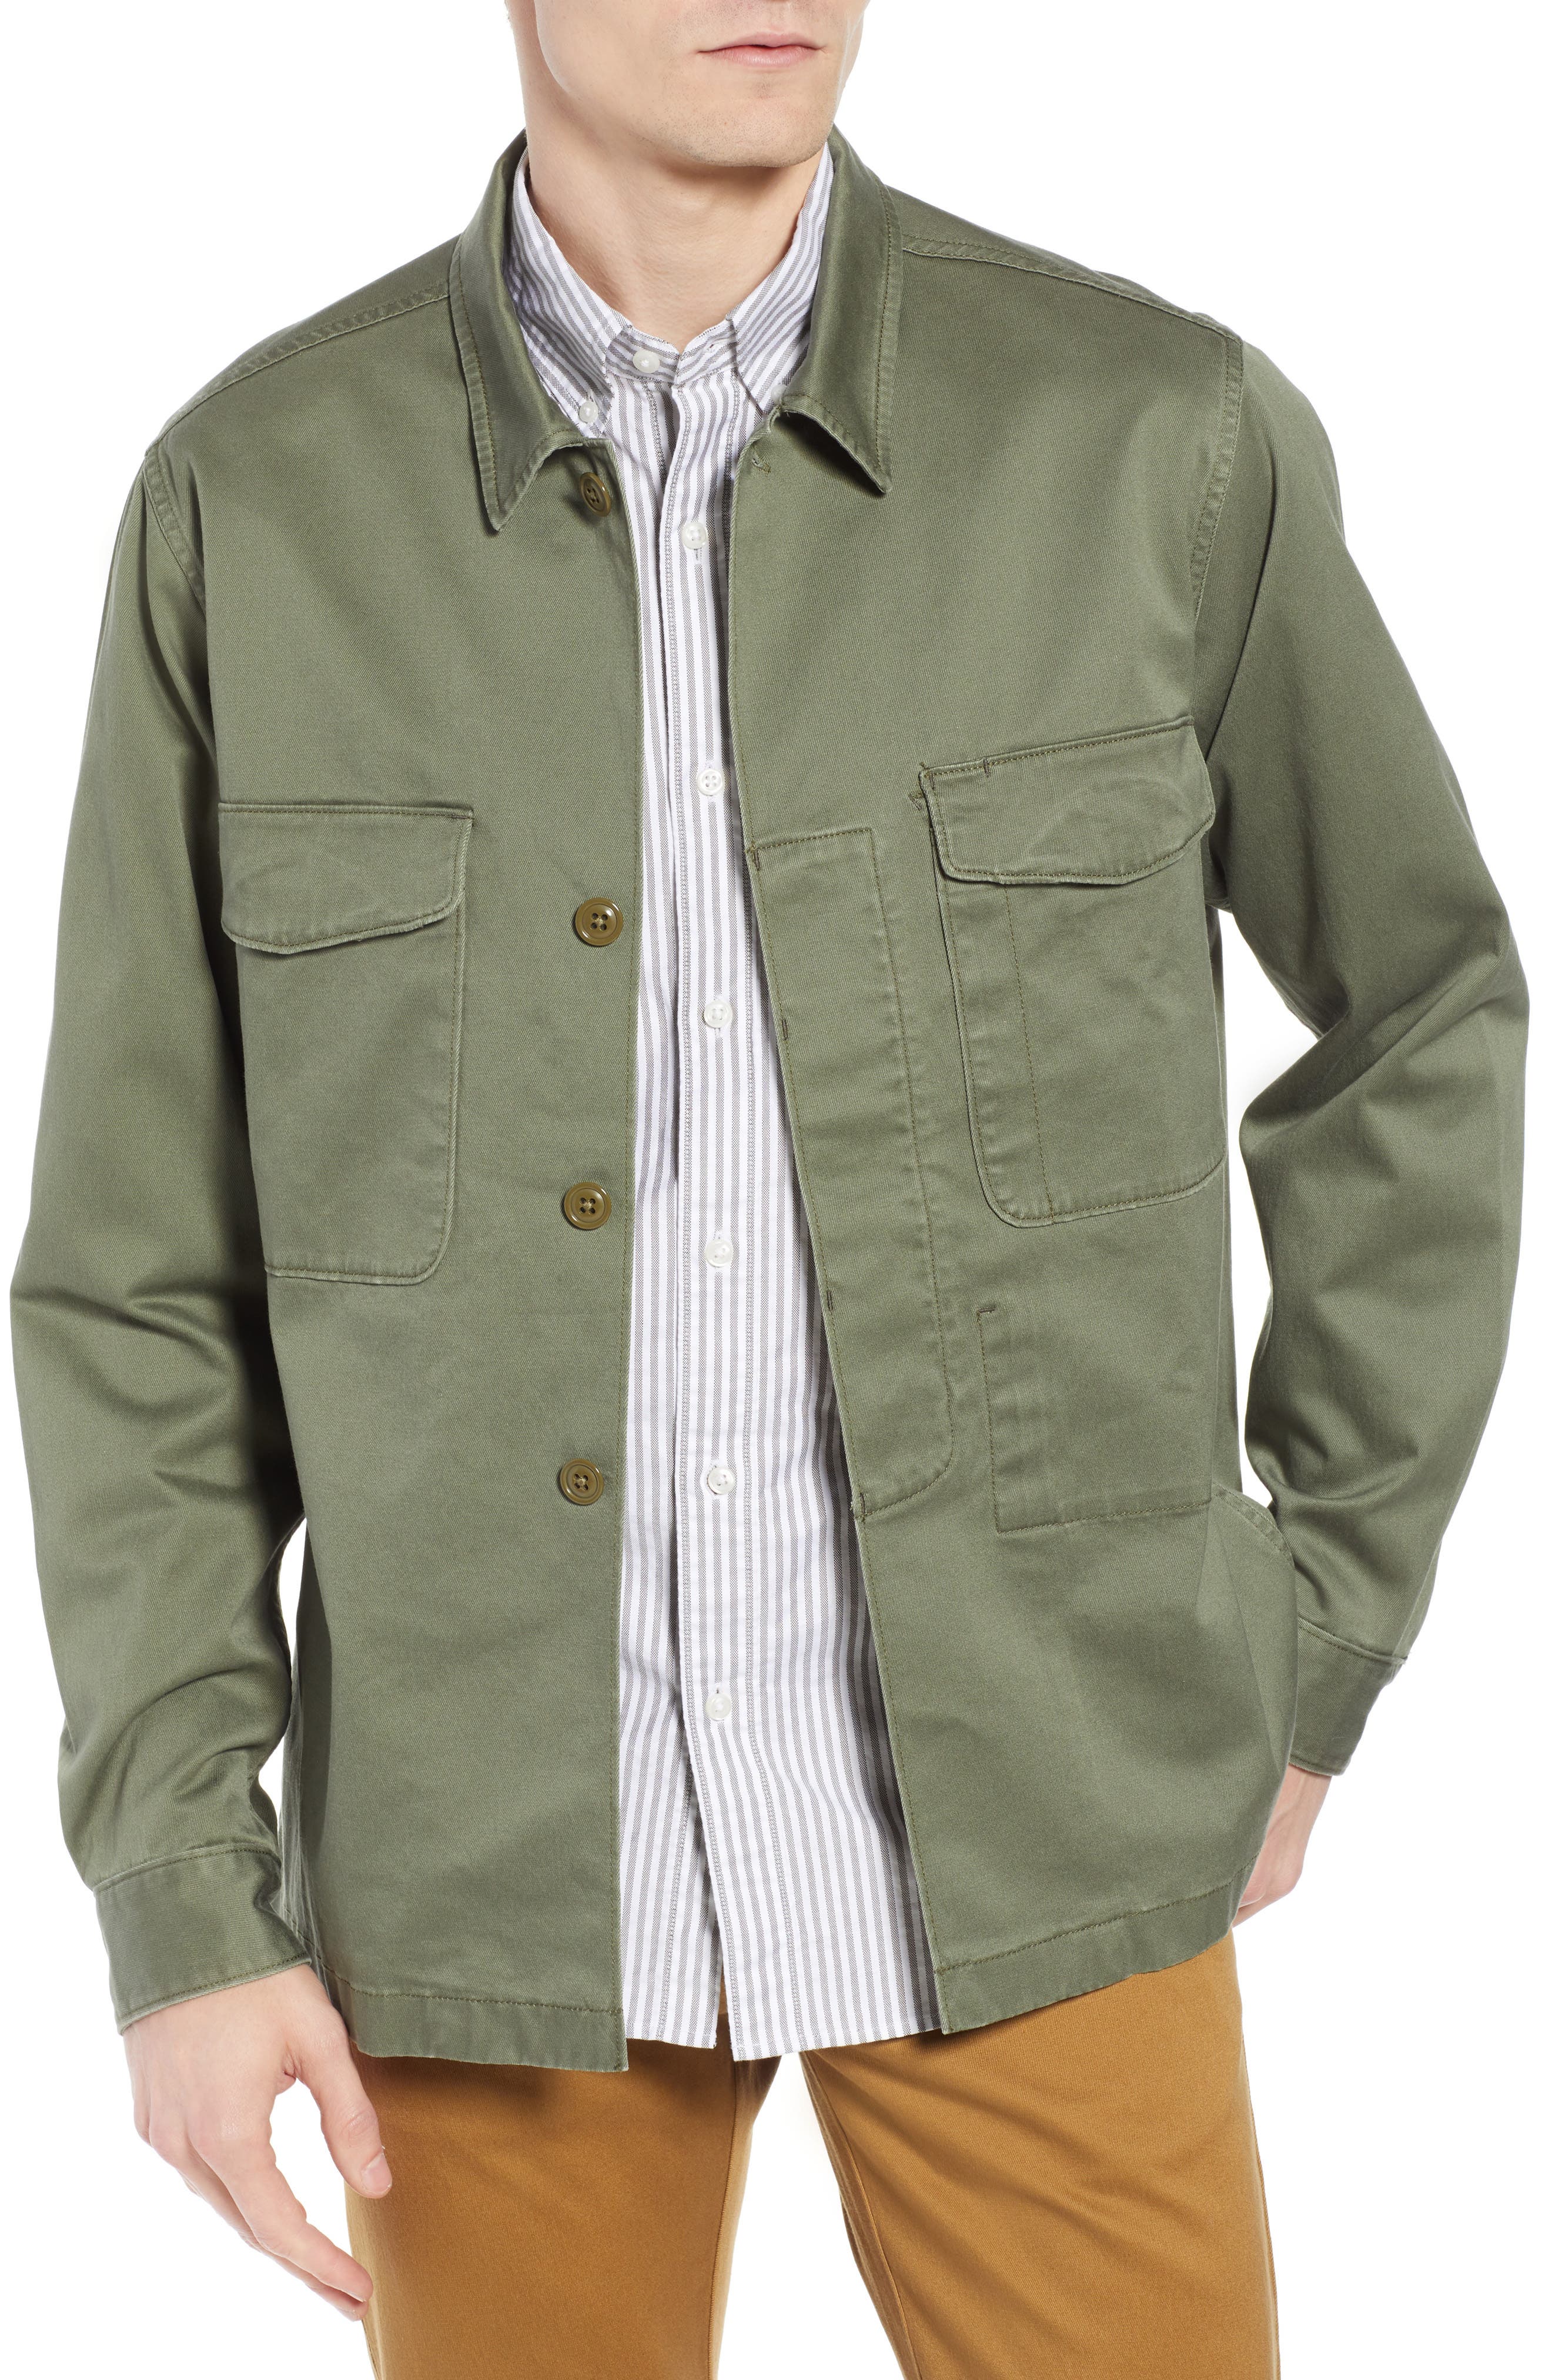 Military Shirt Jacket on Sale, UP TO 67% OFF | www.loop-cn.com